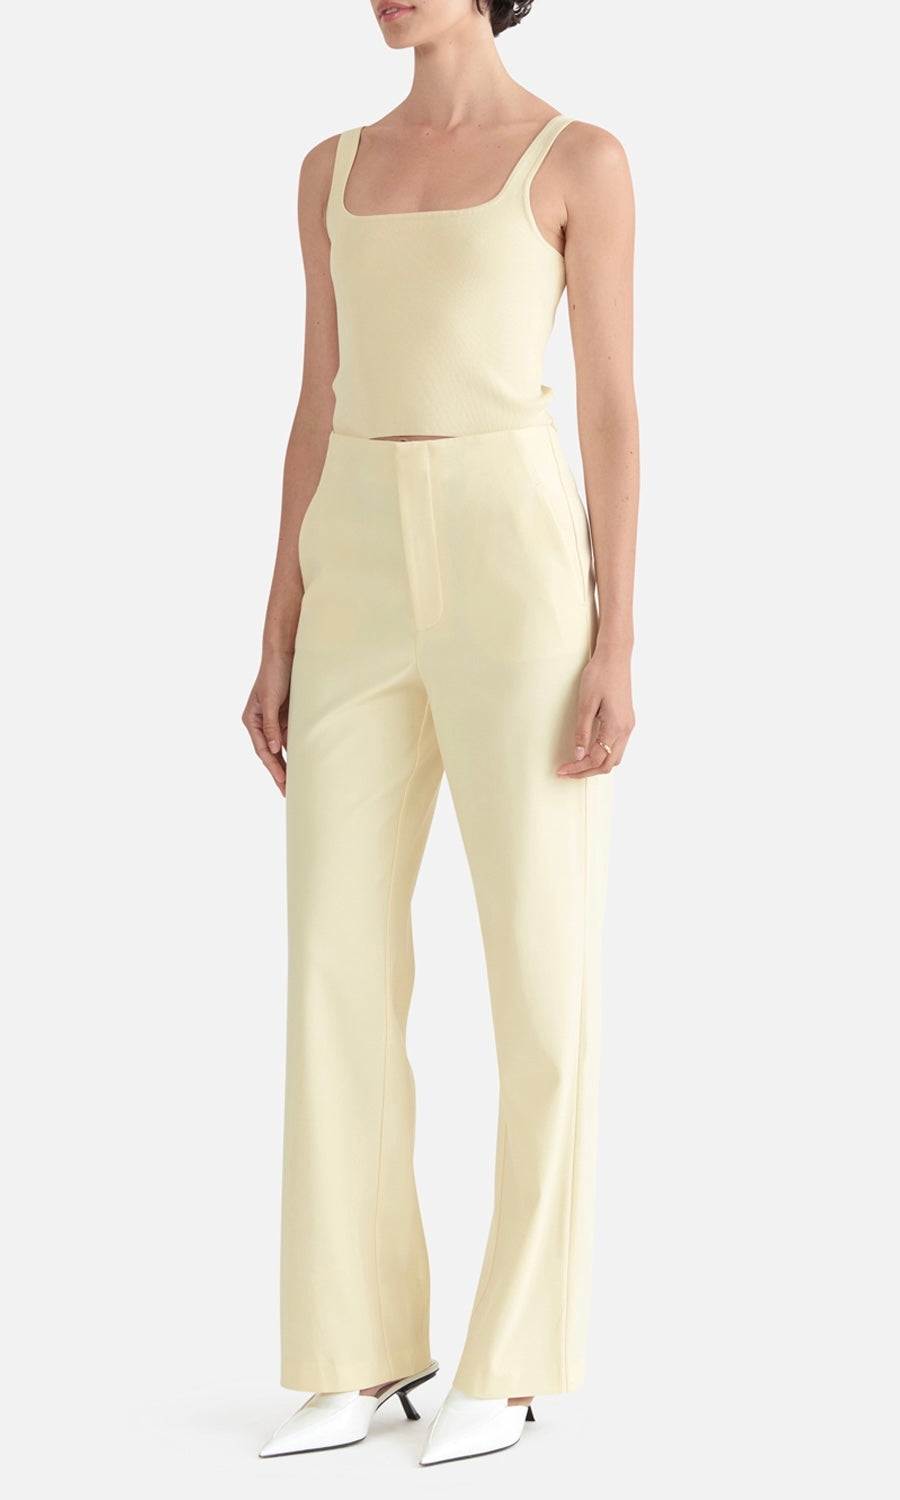 Ena Pelly Dakota Fitted Trouser In French Vanilla